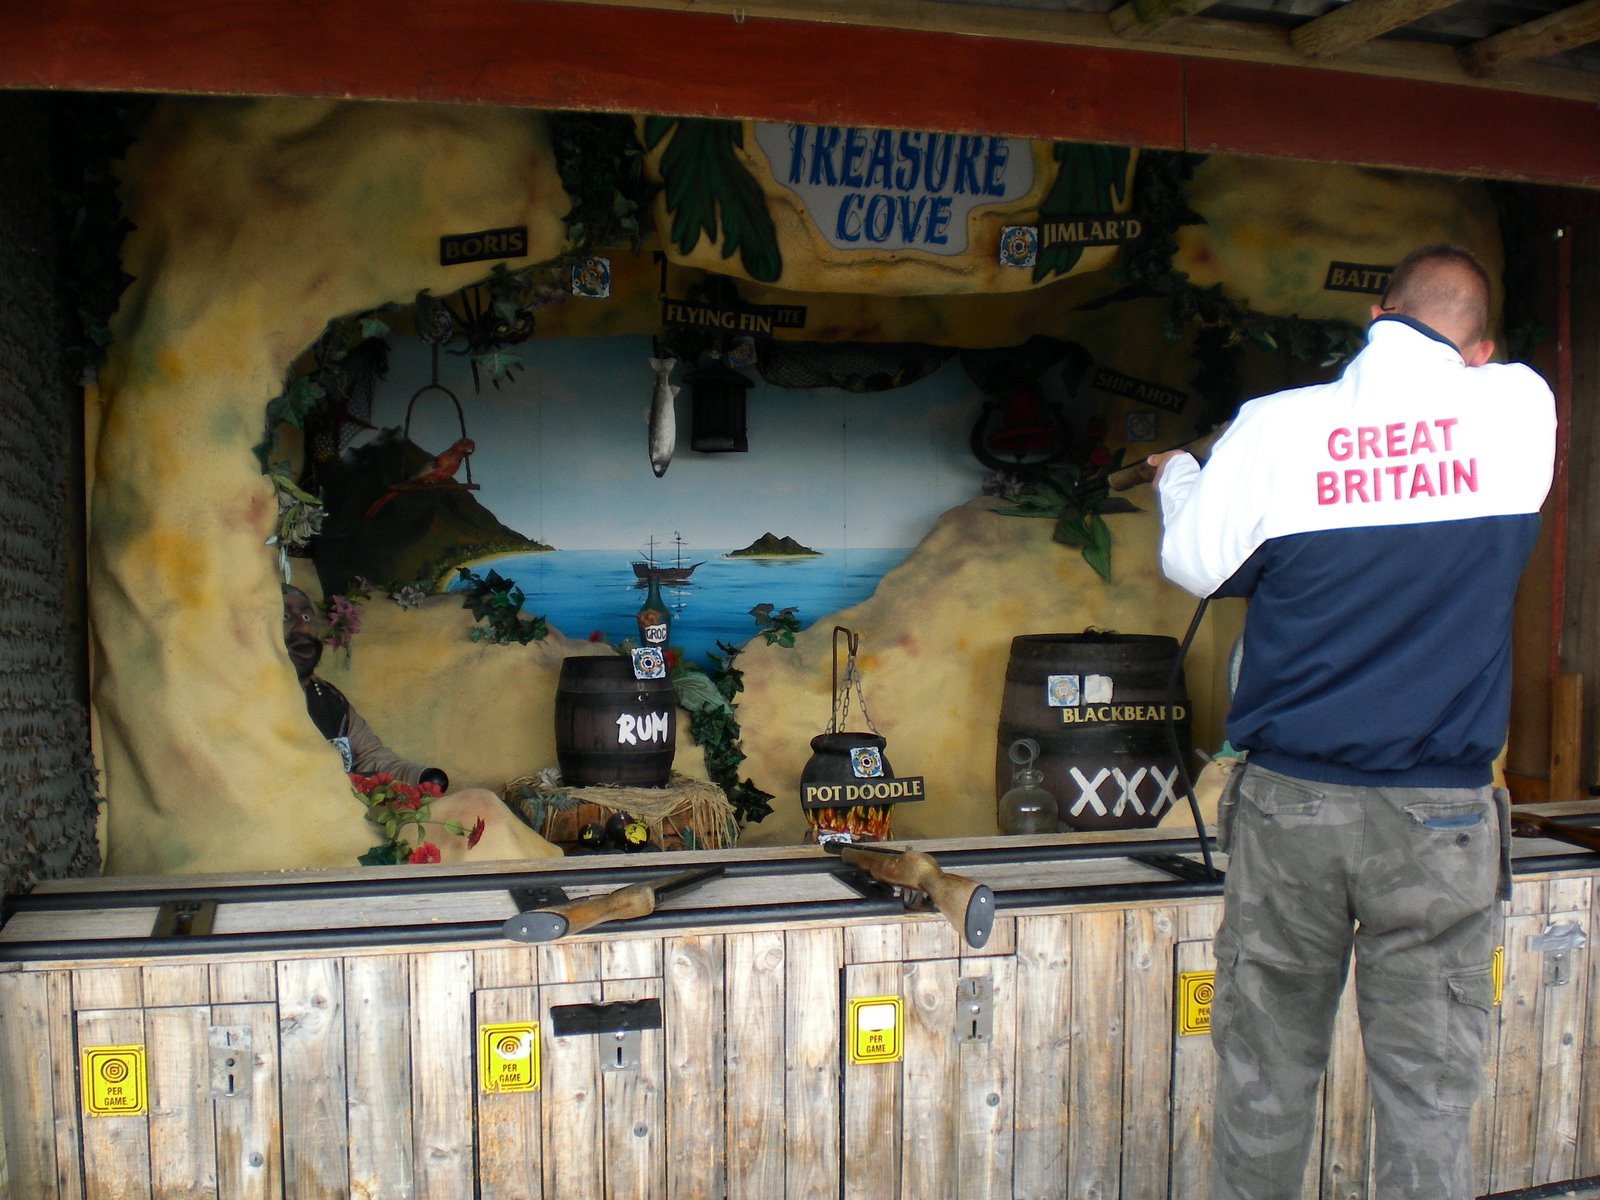 Playing the Treasure Cove shooting gallery at Blackbeard's Treasure Island in Eastbourne